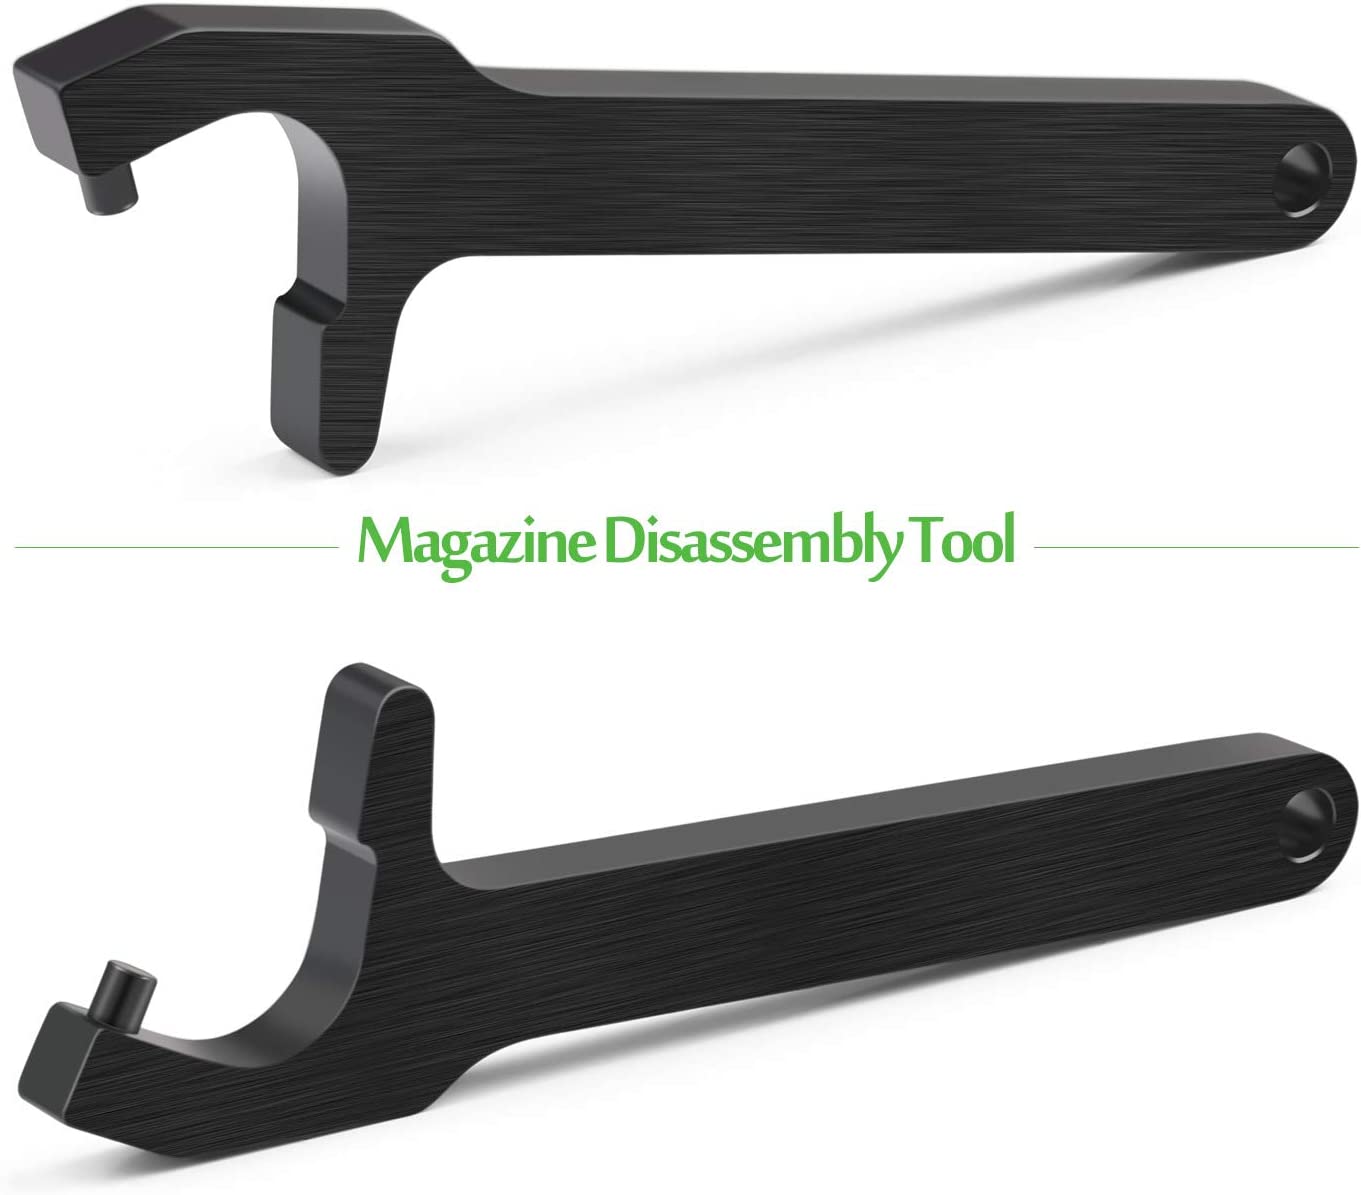 Xaegistac Glock Tool Set All Metal Magazine Disassembly Tool w/Armorers Punch Tool & Front Sight Installation 3/16 Hex Tool for Glock Accessories GT08